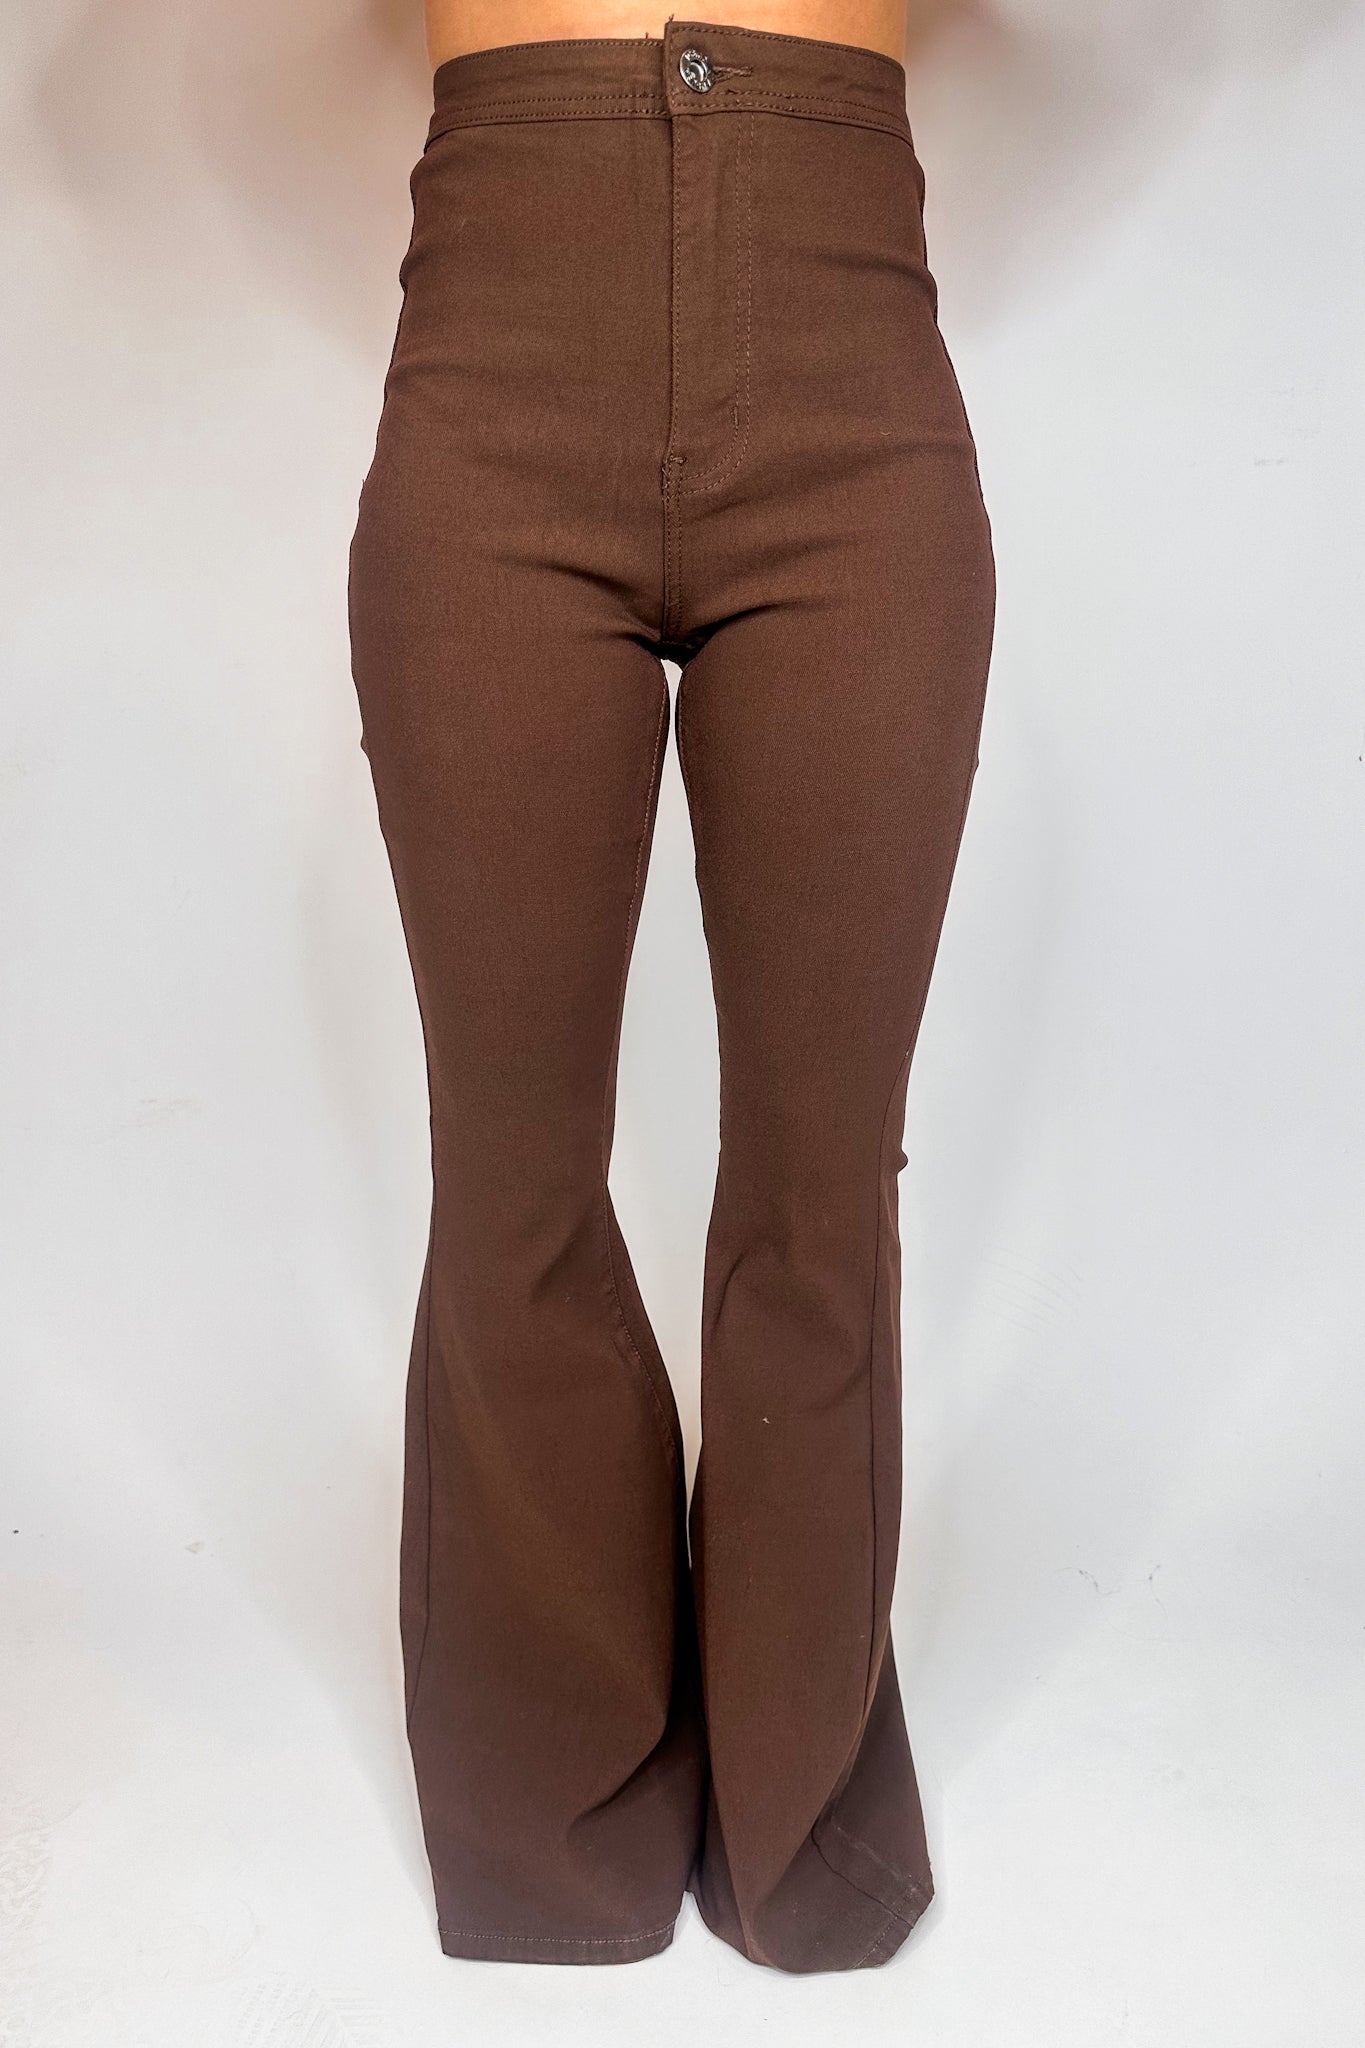 The Shania Twain Brown Stretchy Flare Jean